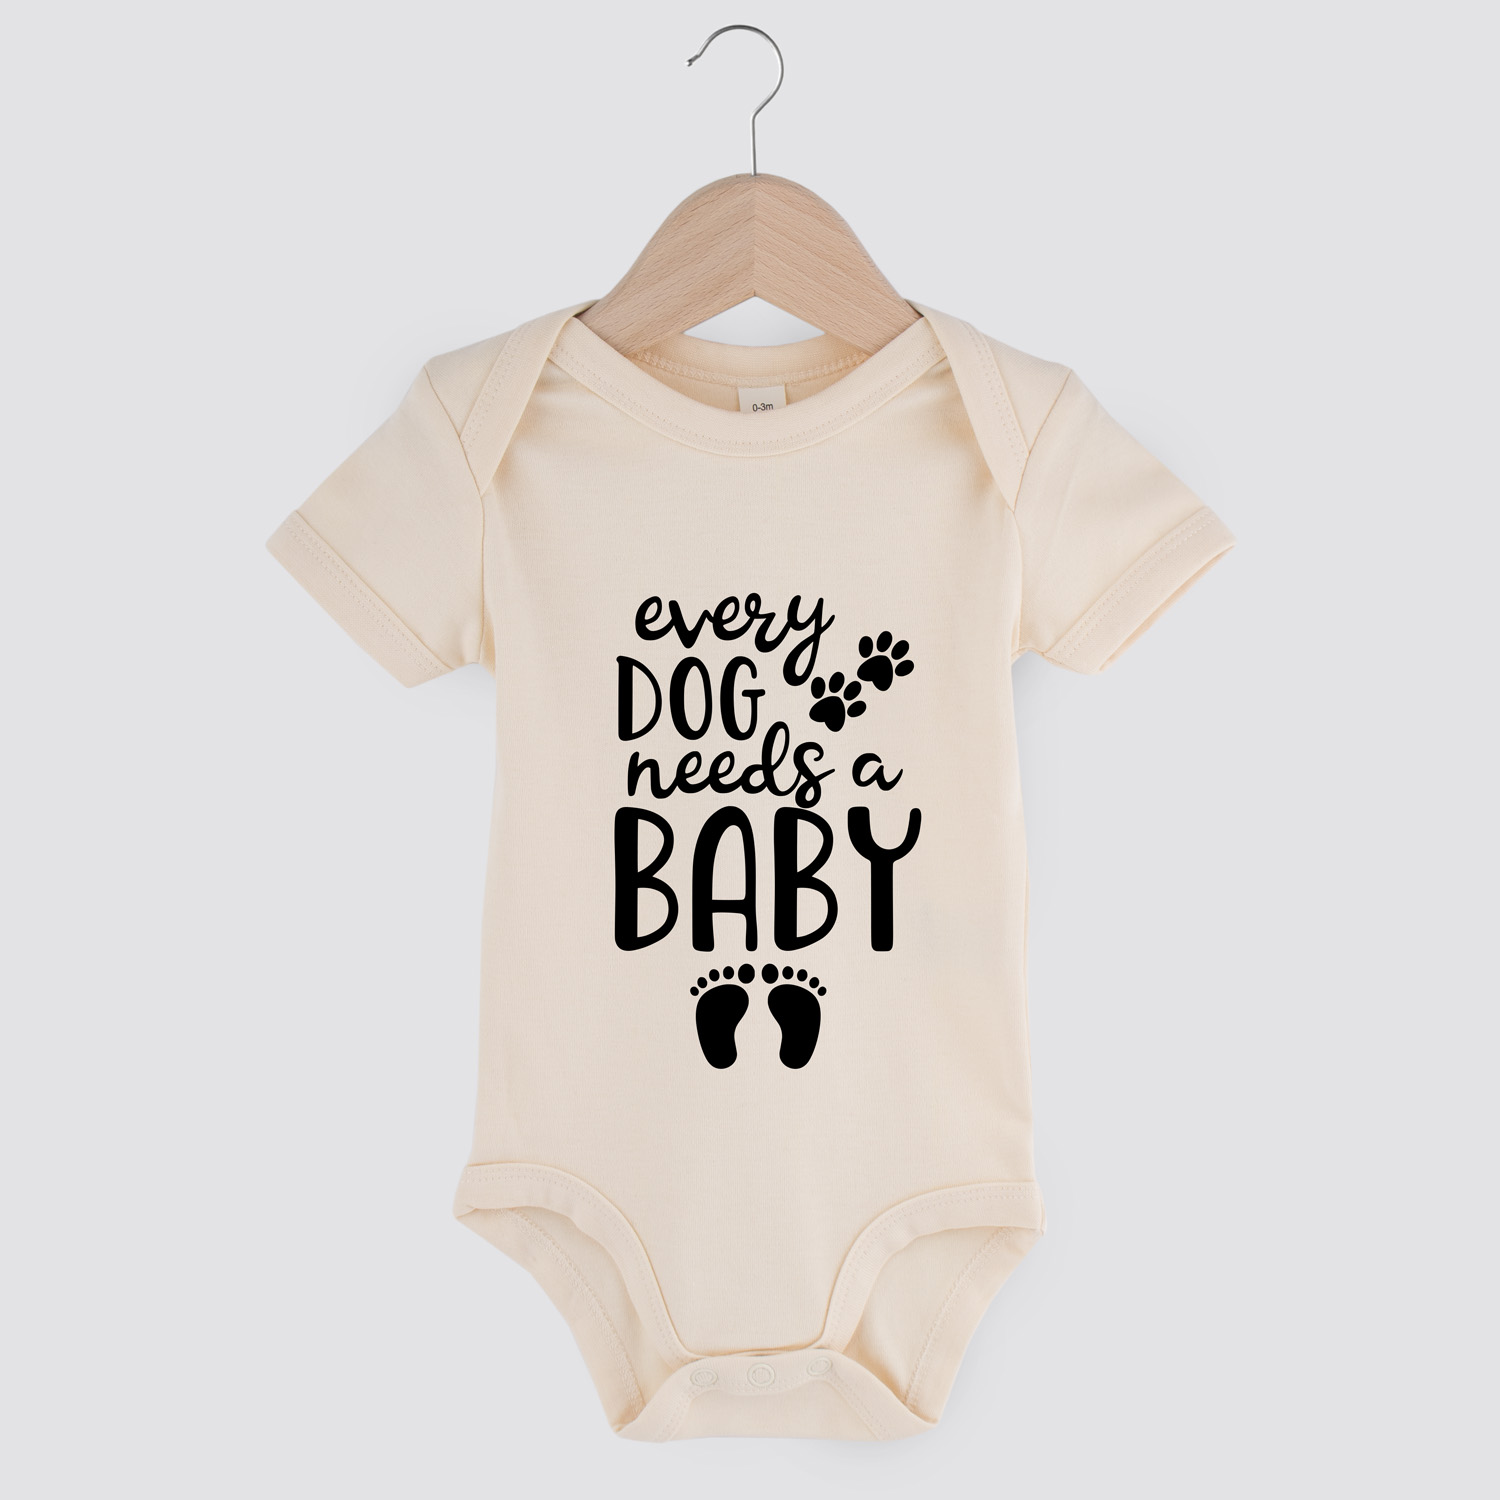 Every dog needs a baby | Baby romper | my fabulous life.